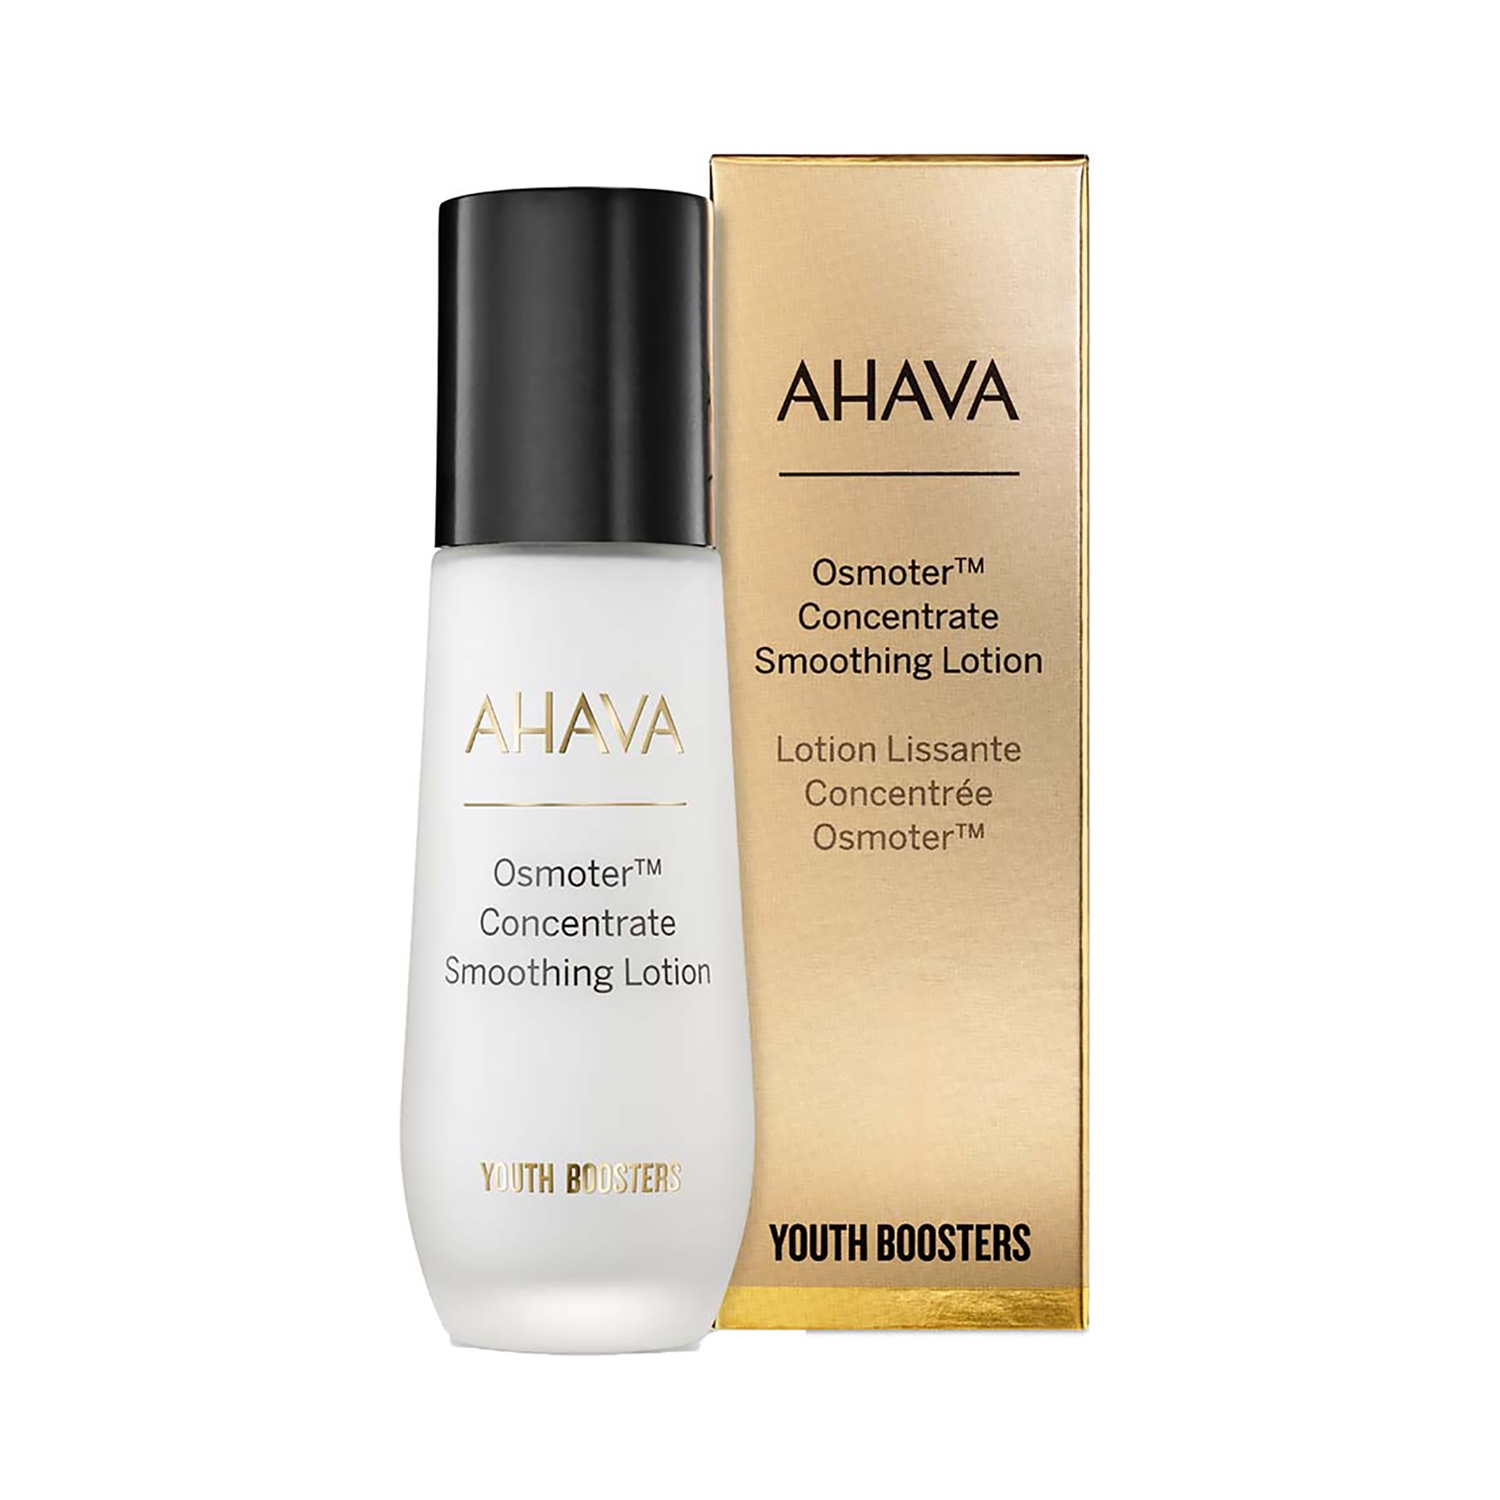 Ahava | Ahava Osmoter Concentrate Smoothing Lotion (50ml)